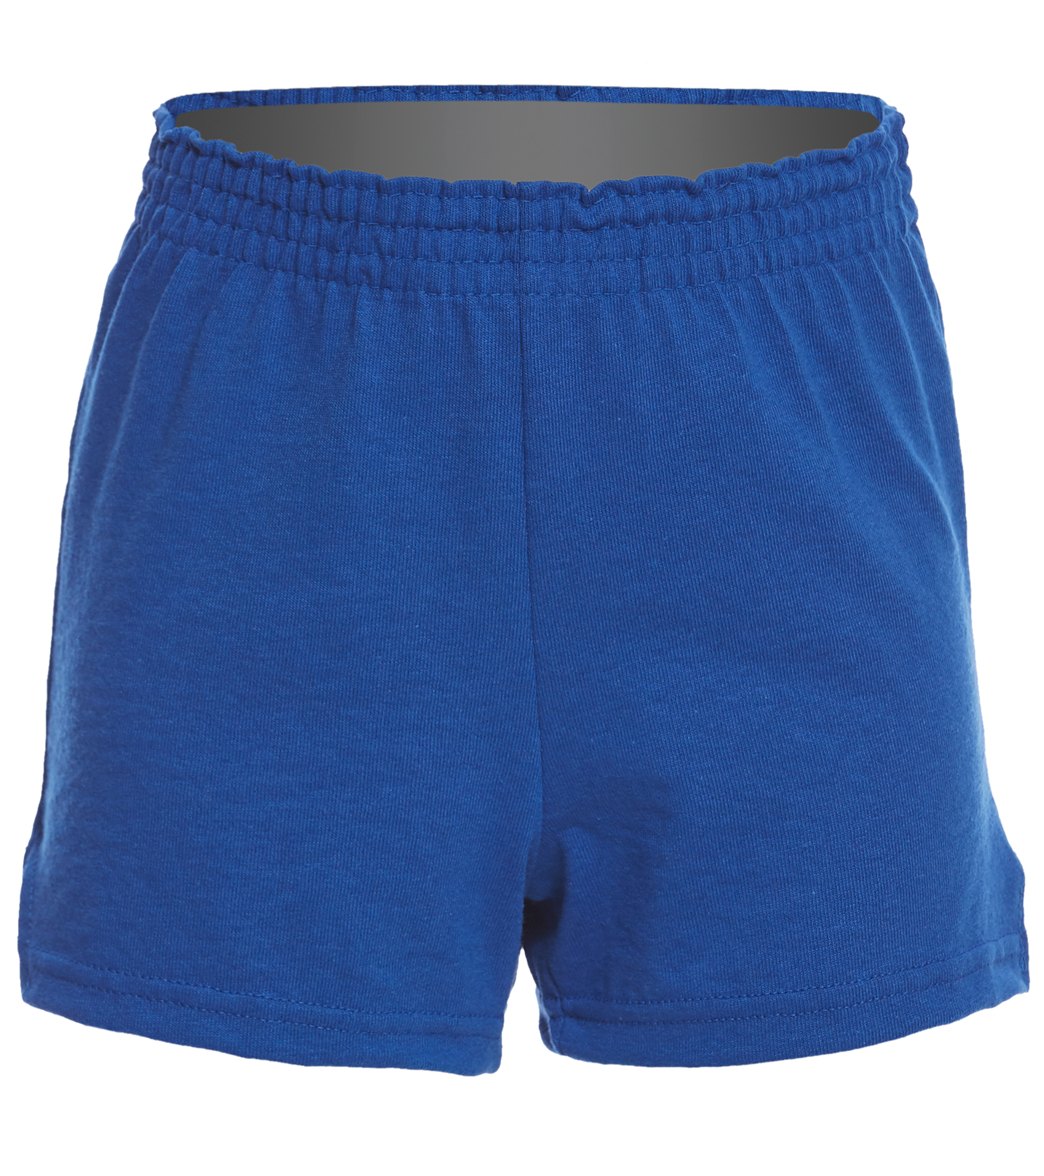 Girls' Fitted Jersey Short - Royal Xl Size Xl Cotton/Polyester - Swimoutlet.com